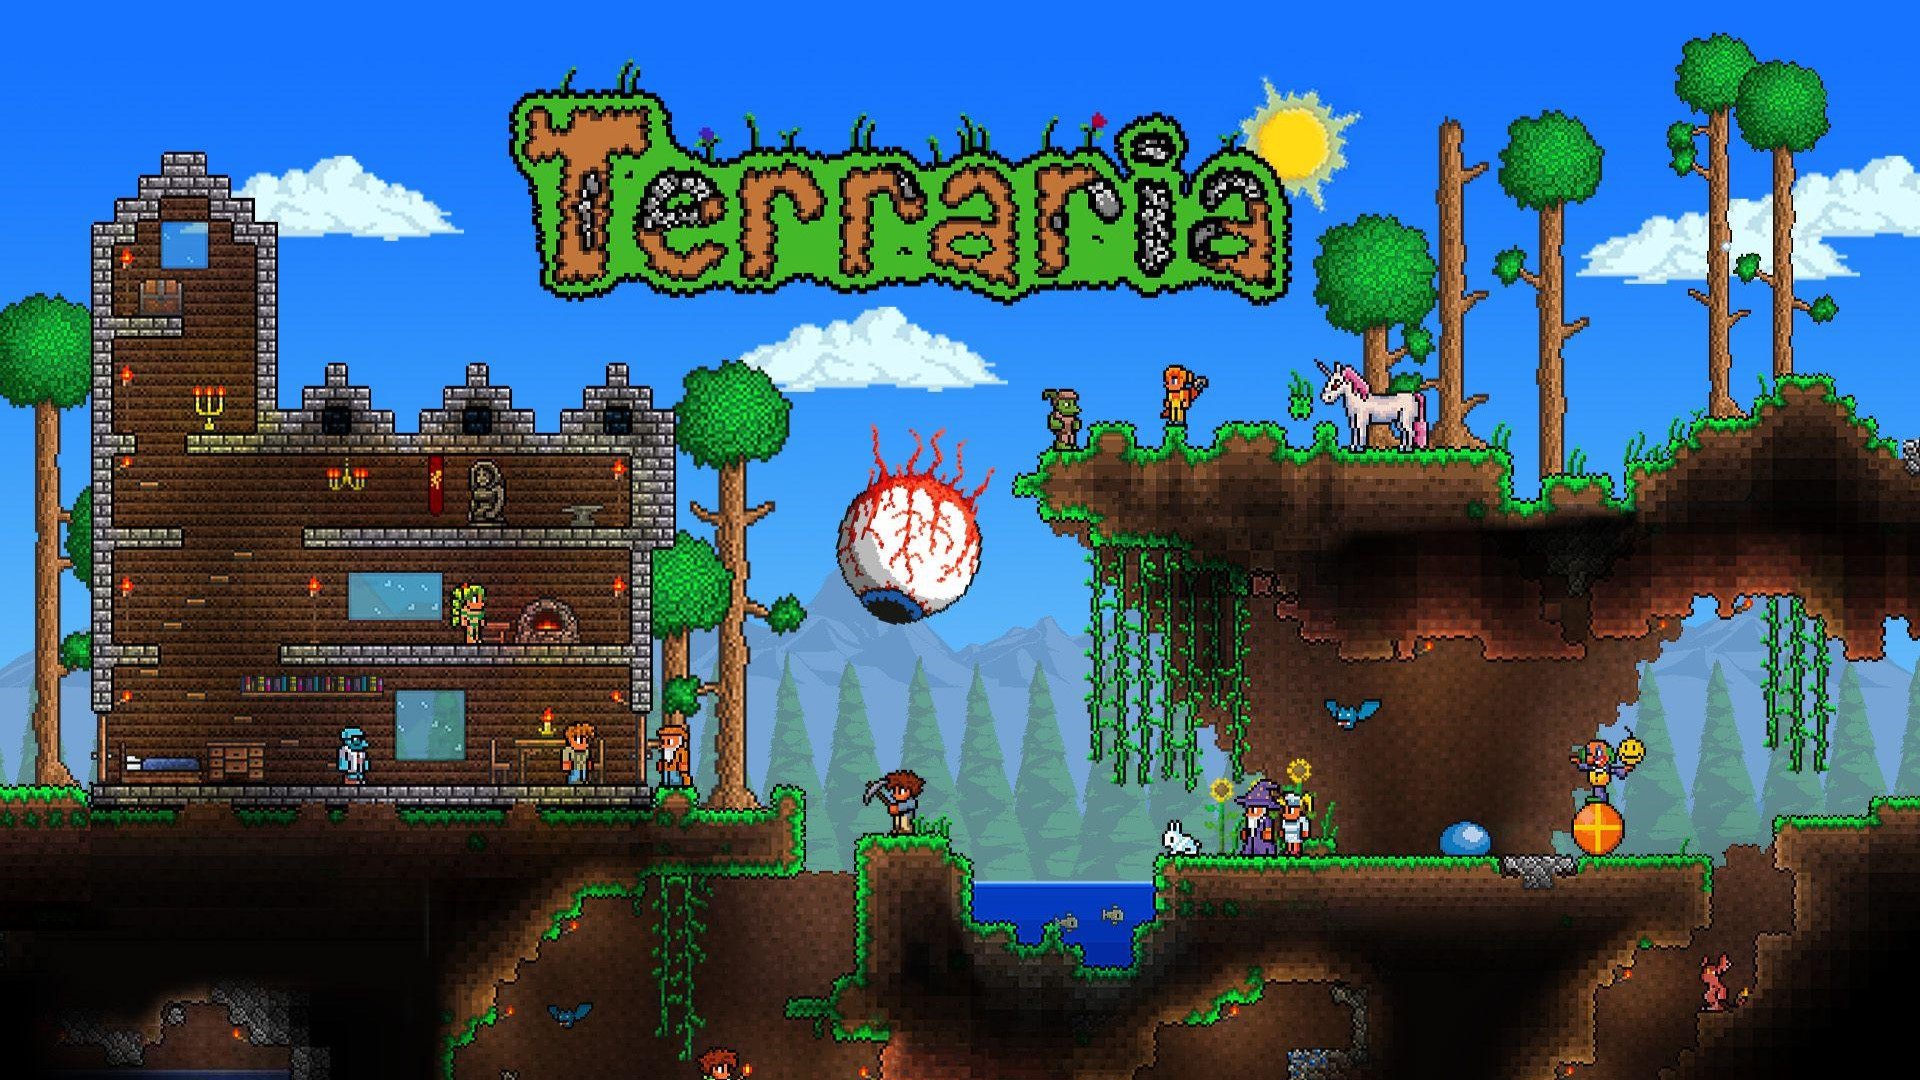 Terraria breaks record as the most positively reviewed game on Steam